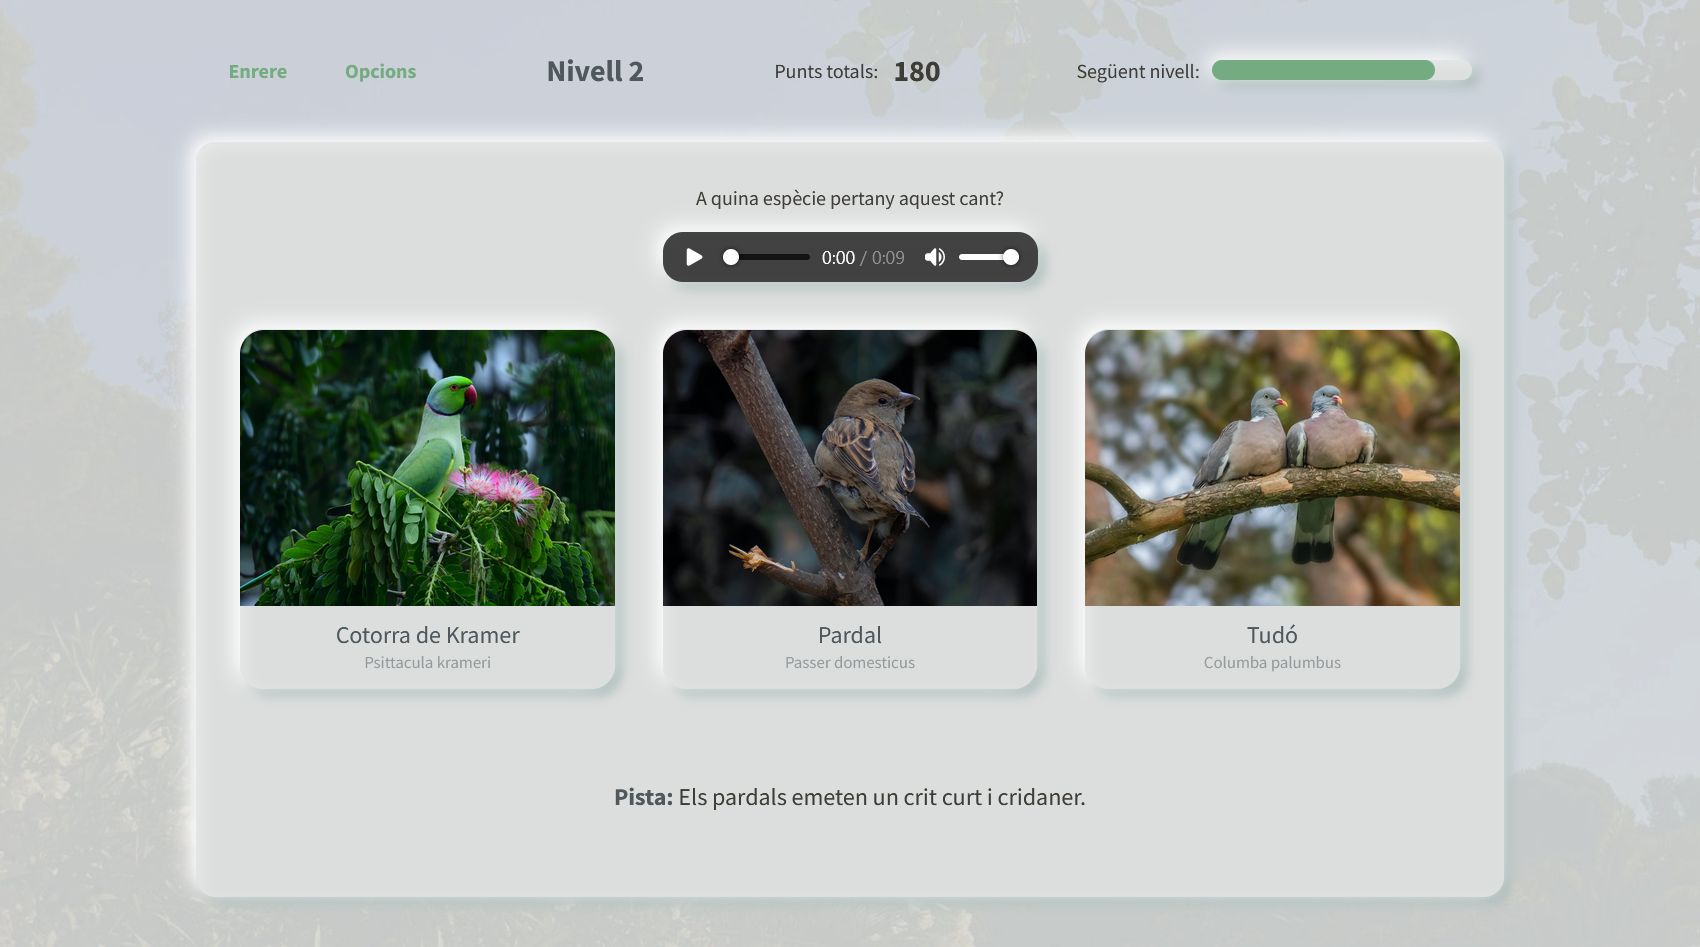 Screenshot of the Orniteco game screen, showing the quiz options for three different birds accompanied by their pictures.